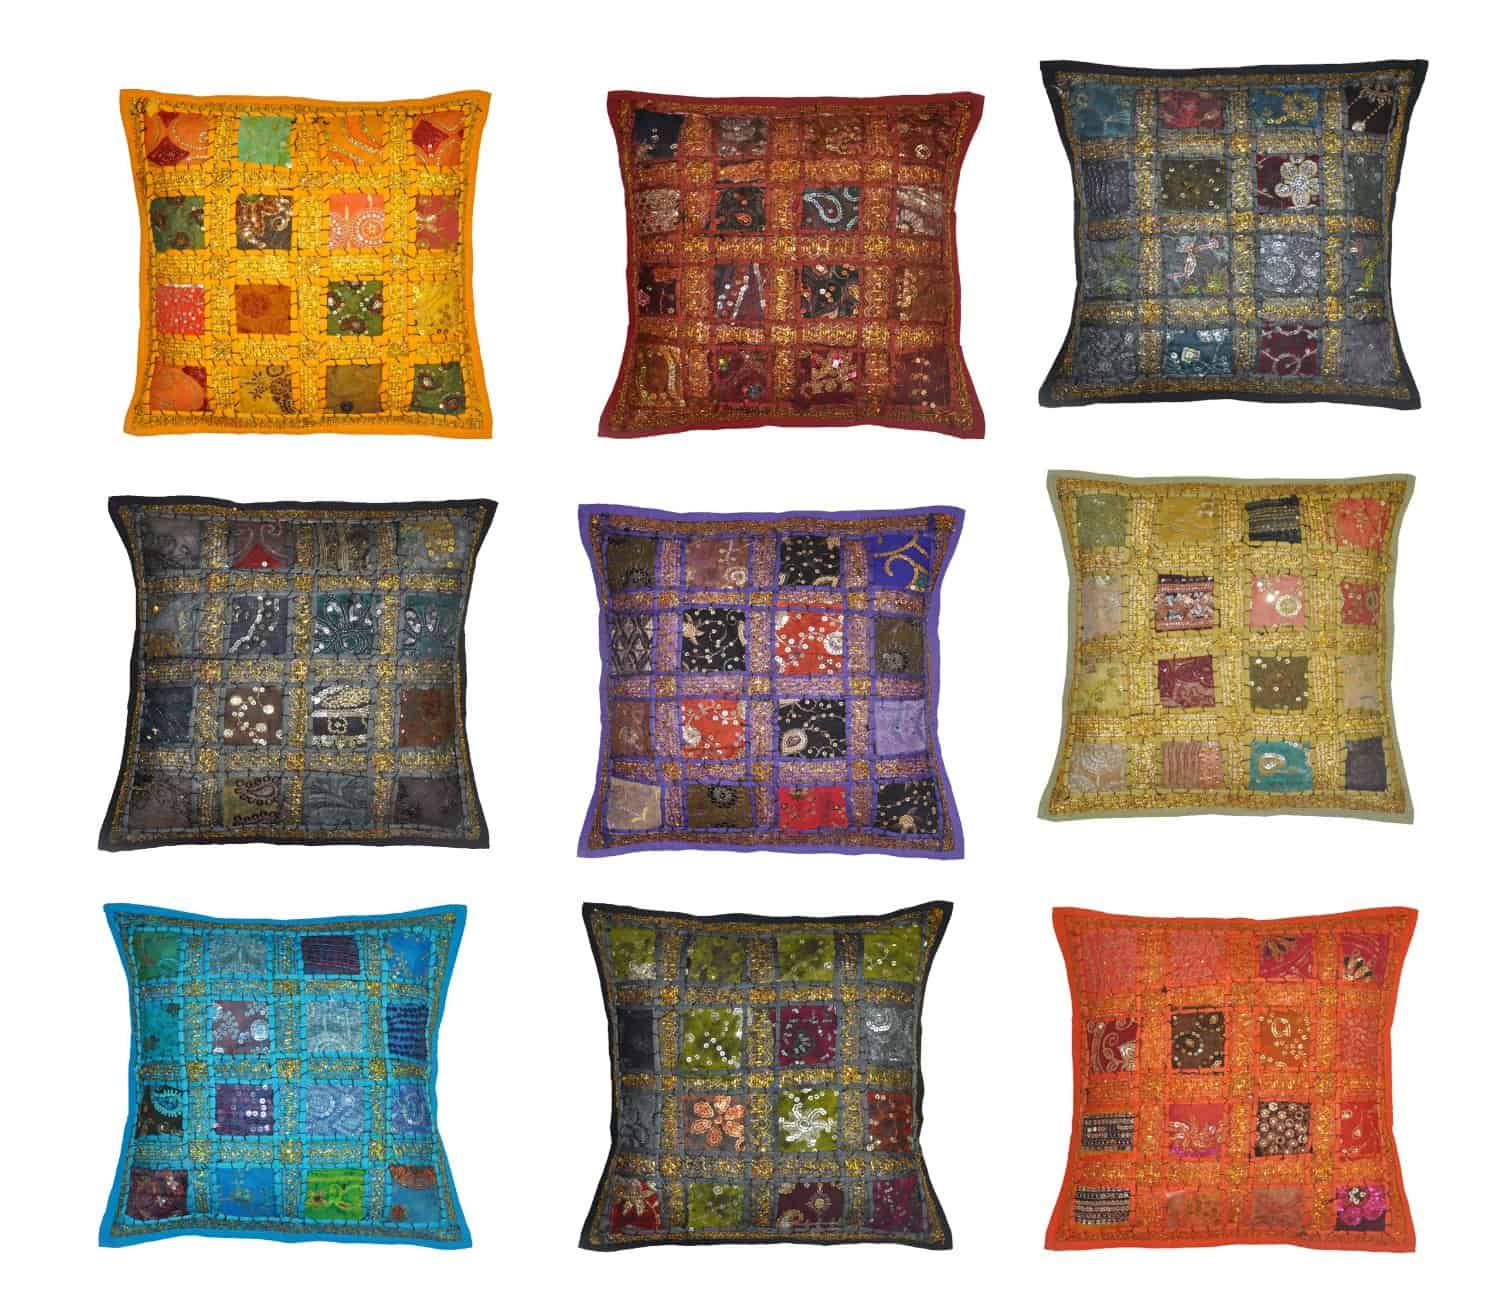 Indian Traditional Handmade Decorative Cushion Covers Patchwork, 16 X 16 Inches (Design #1)